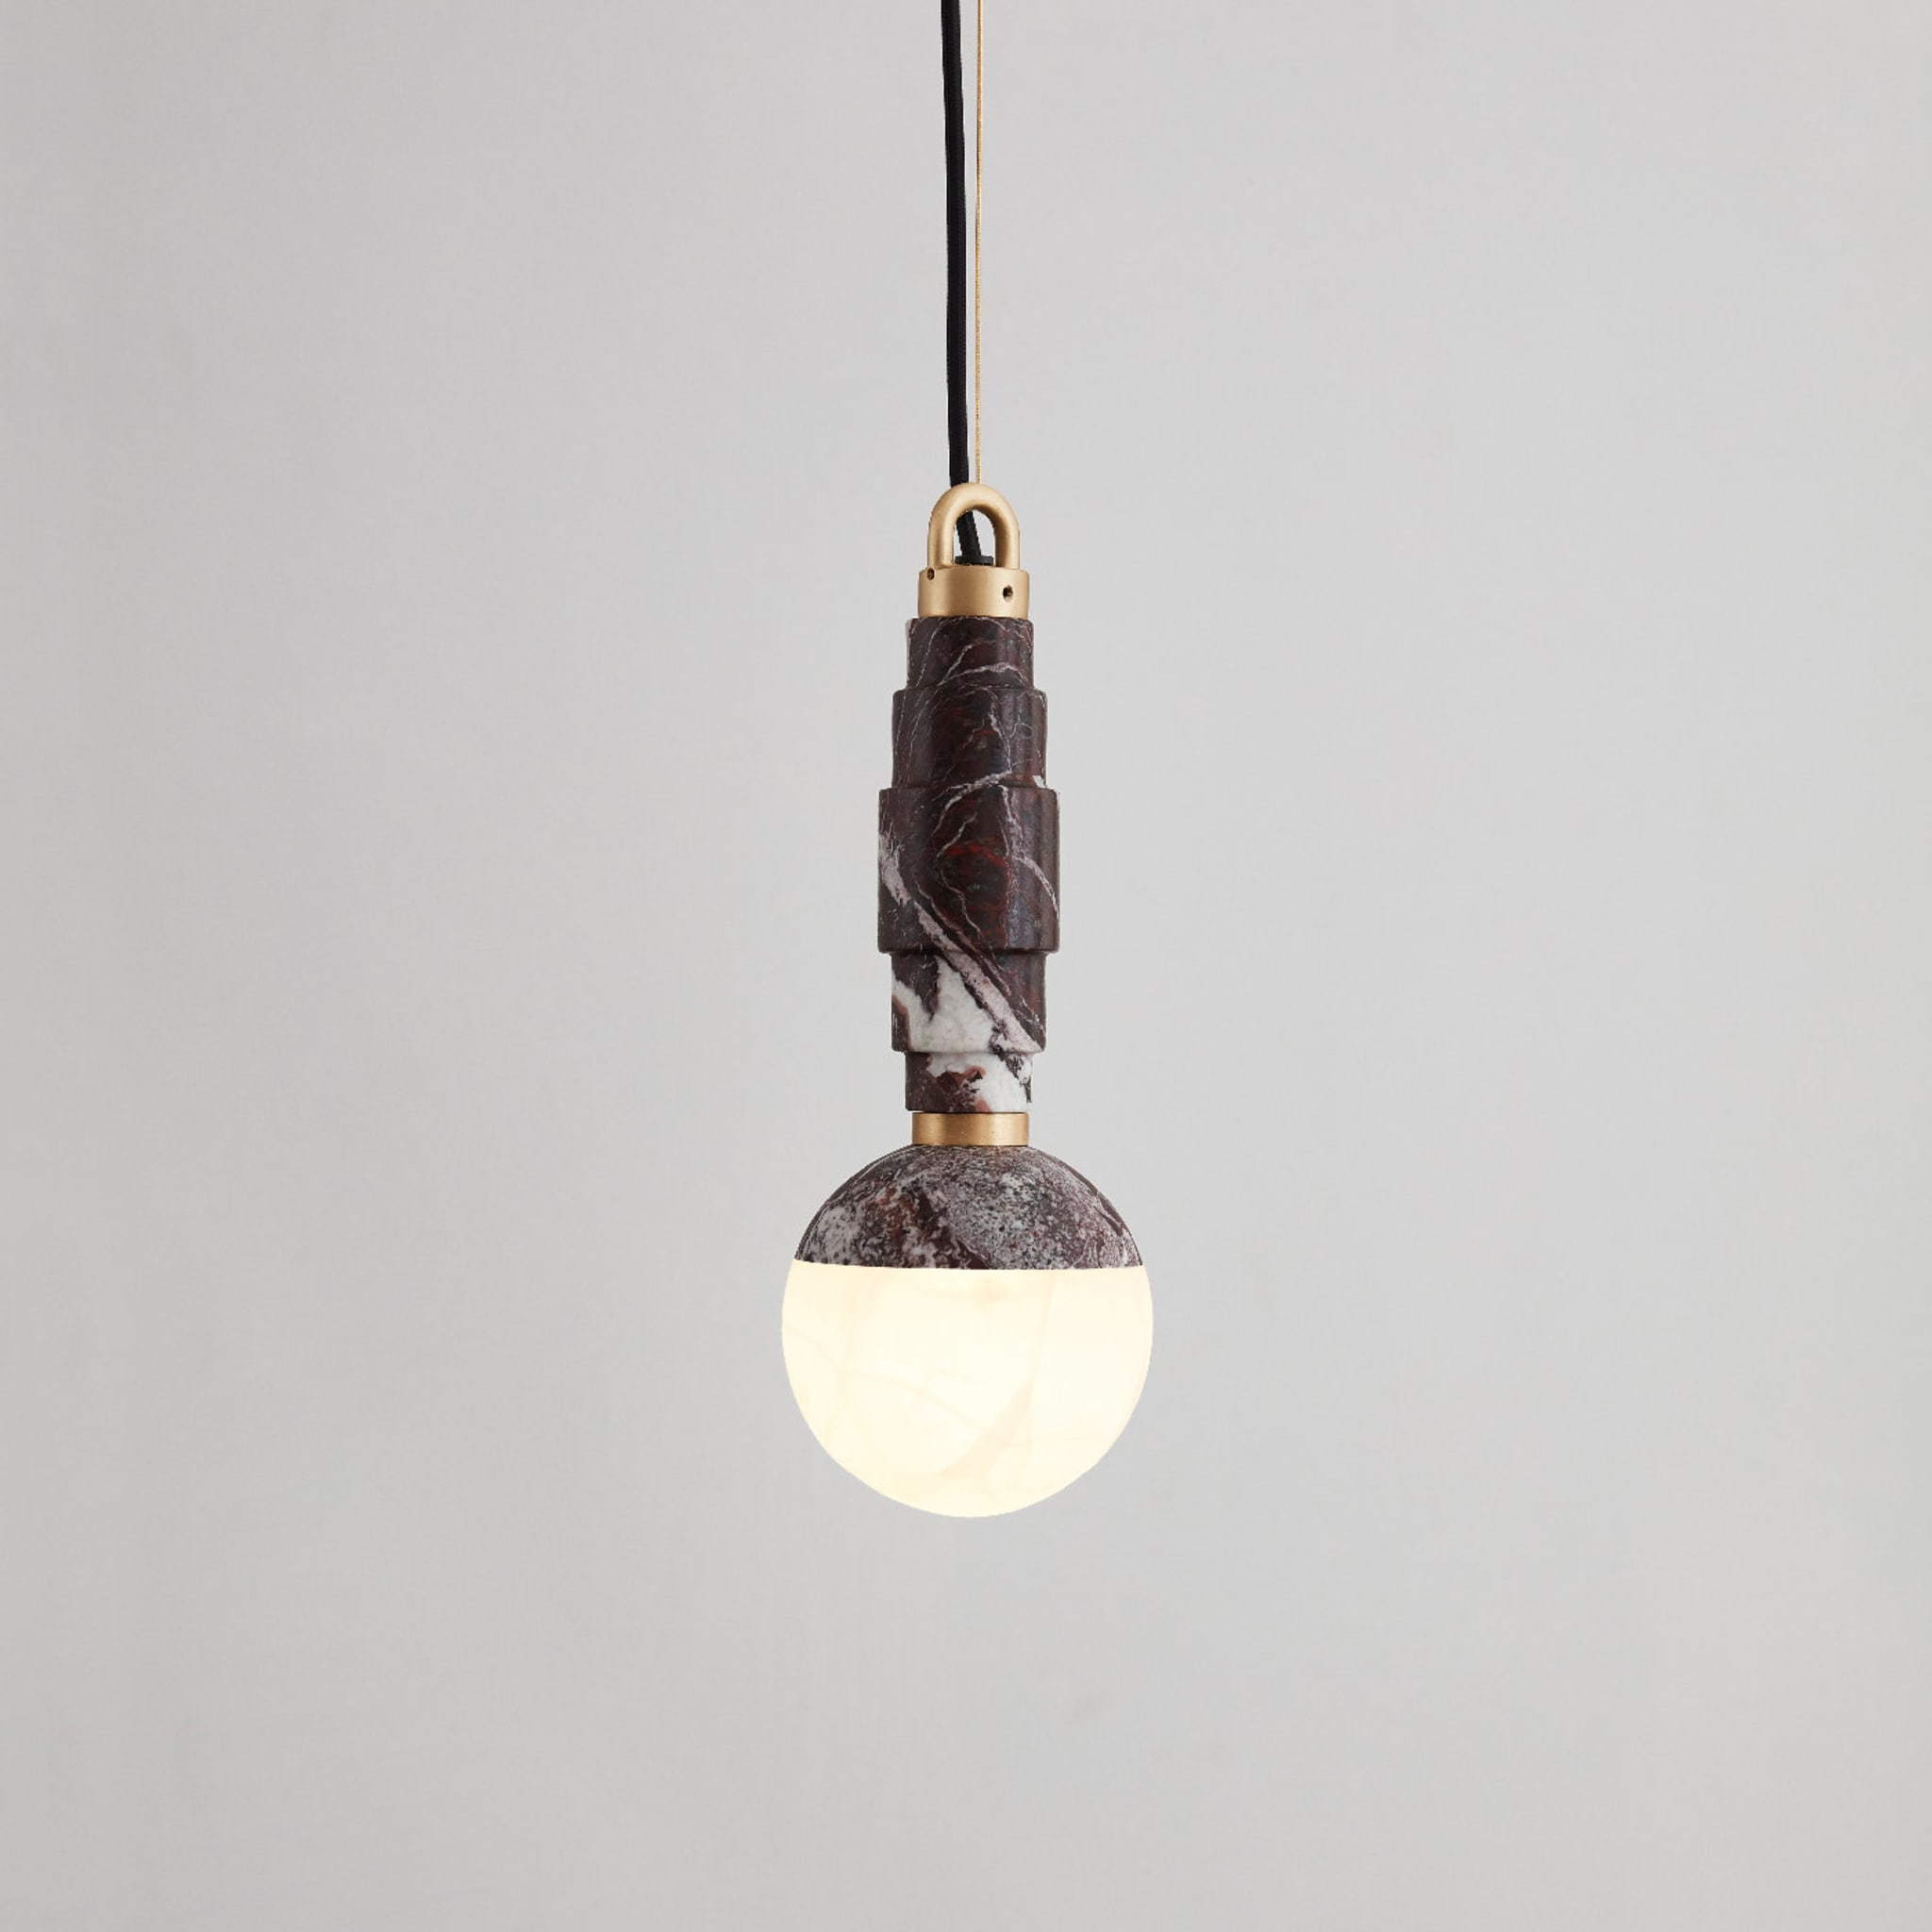 Lunar Pendant Lamp in Rosso Levanto Marble and Onyx  - Alternative view 3